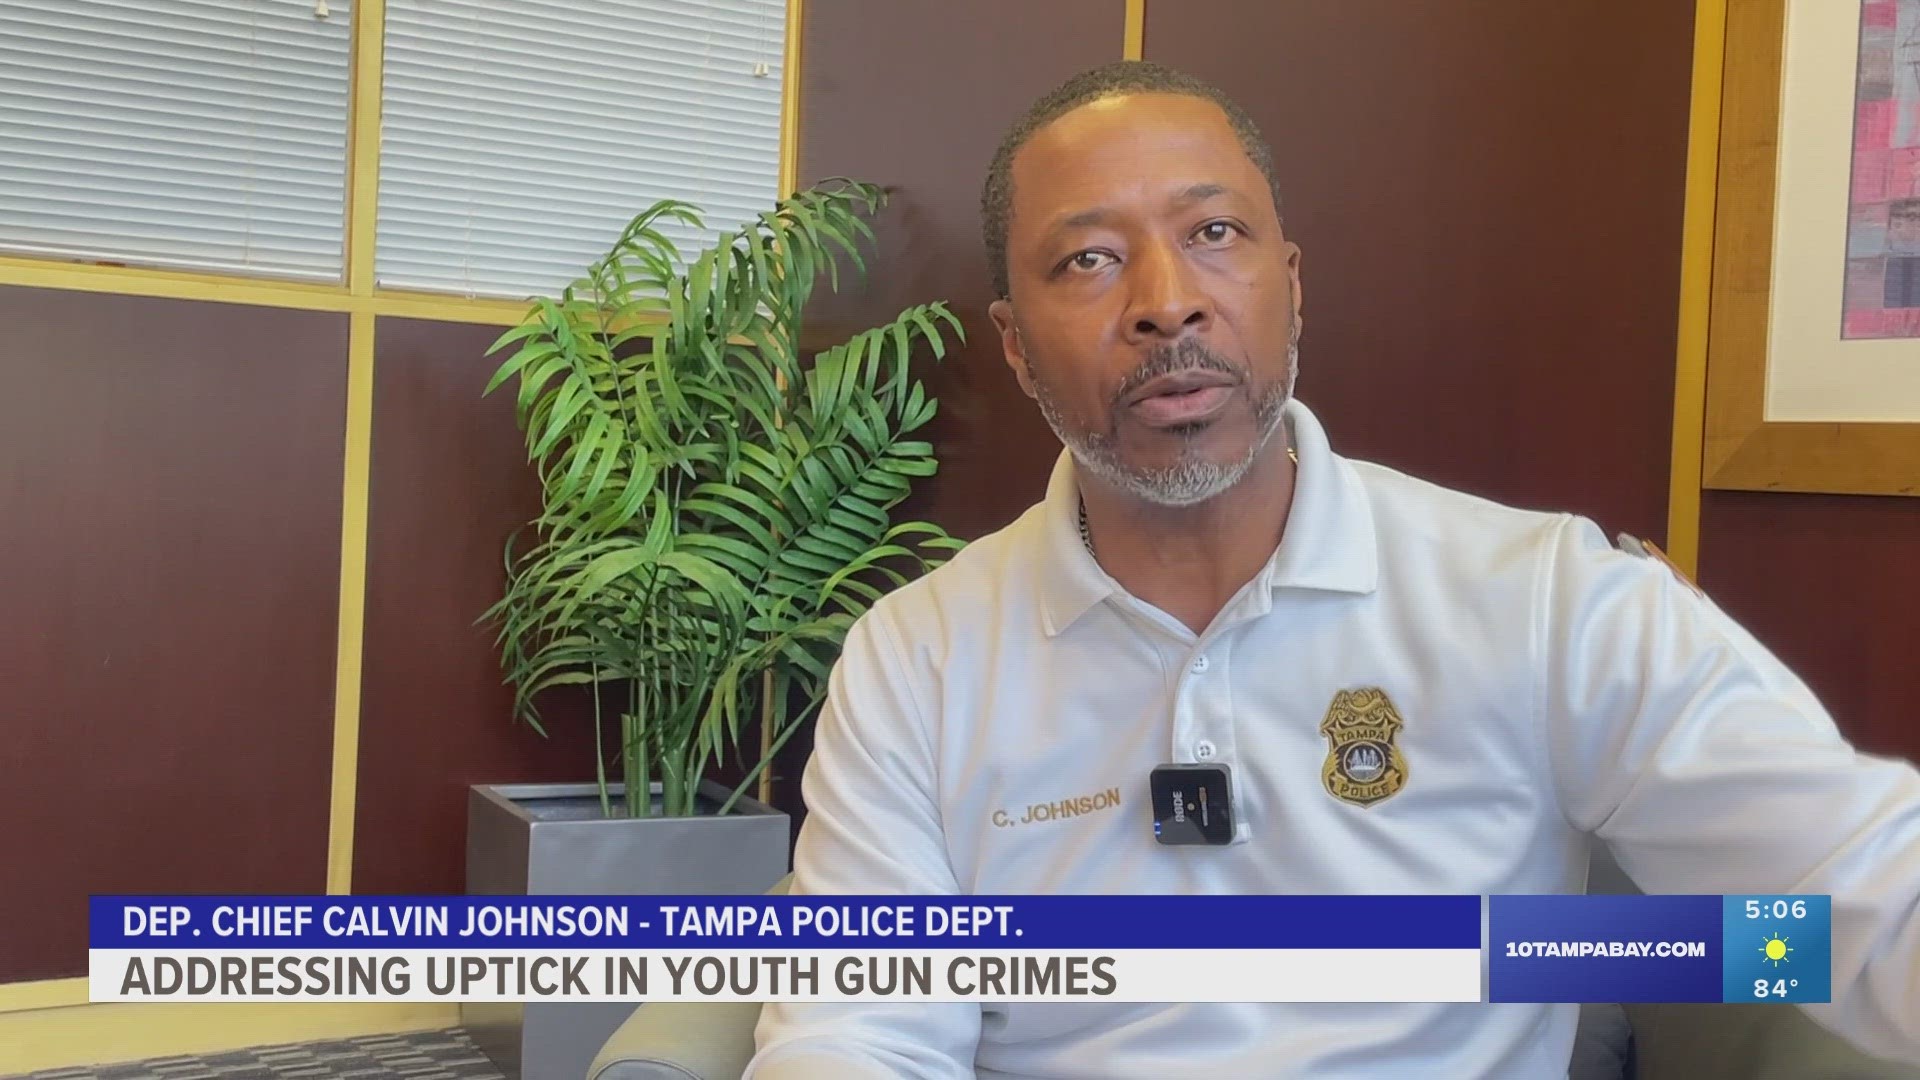 Tampa is now implementing $1.5 million in federal grant money to address youth violent crime.